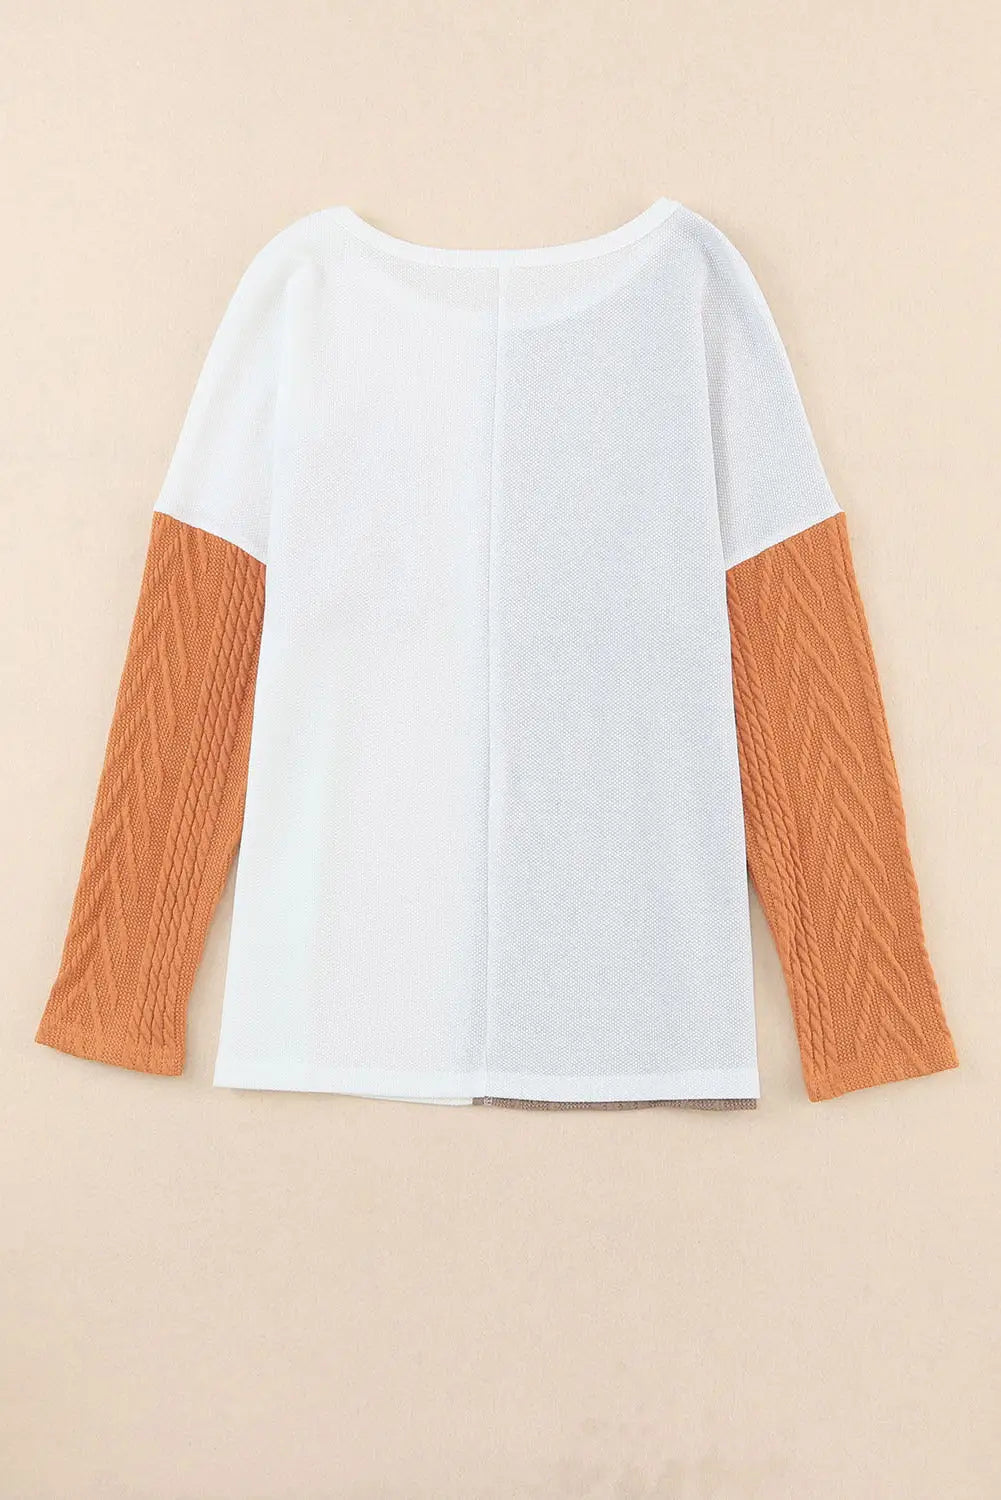 Orange long sleeve colorblock chest pocket textured knit top - tops